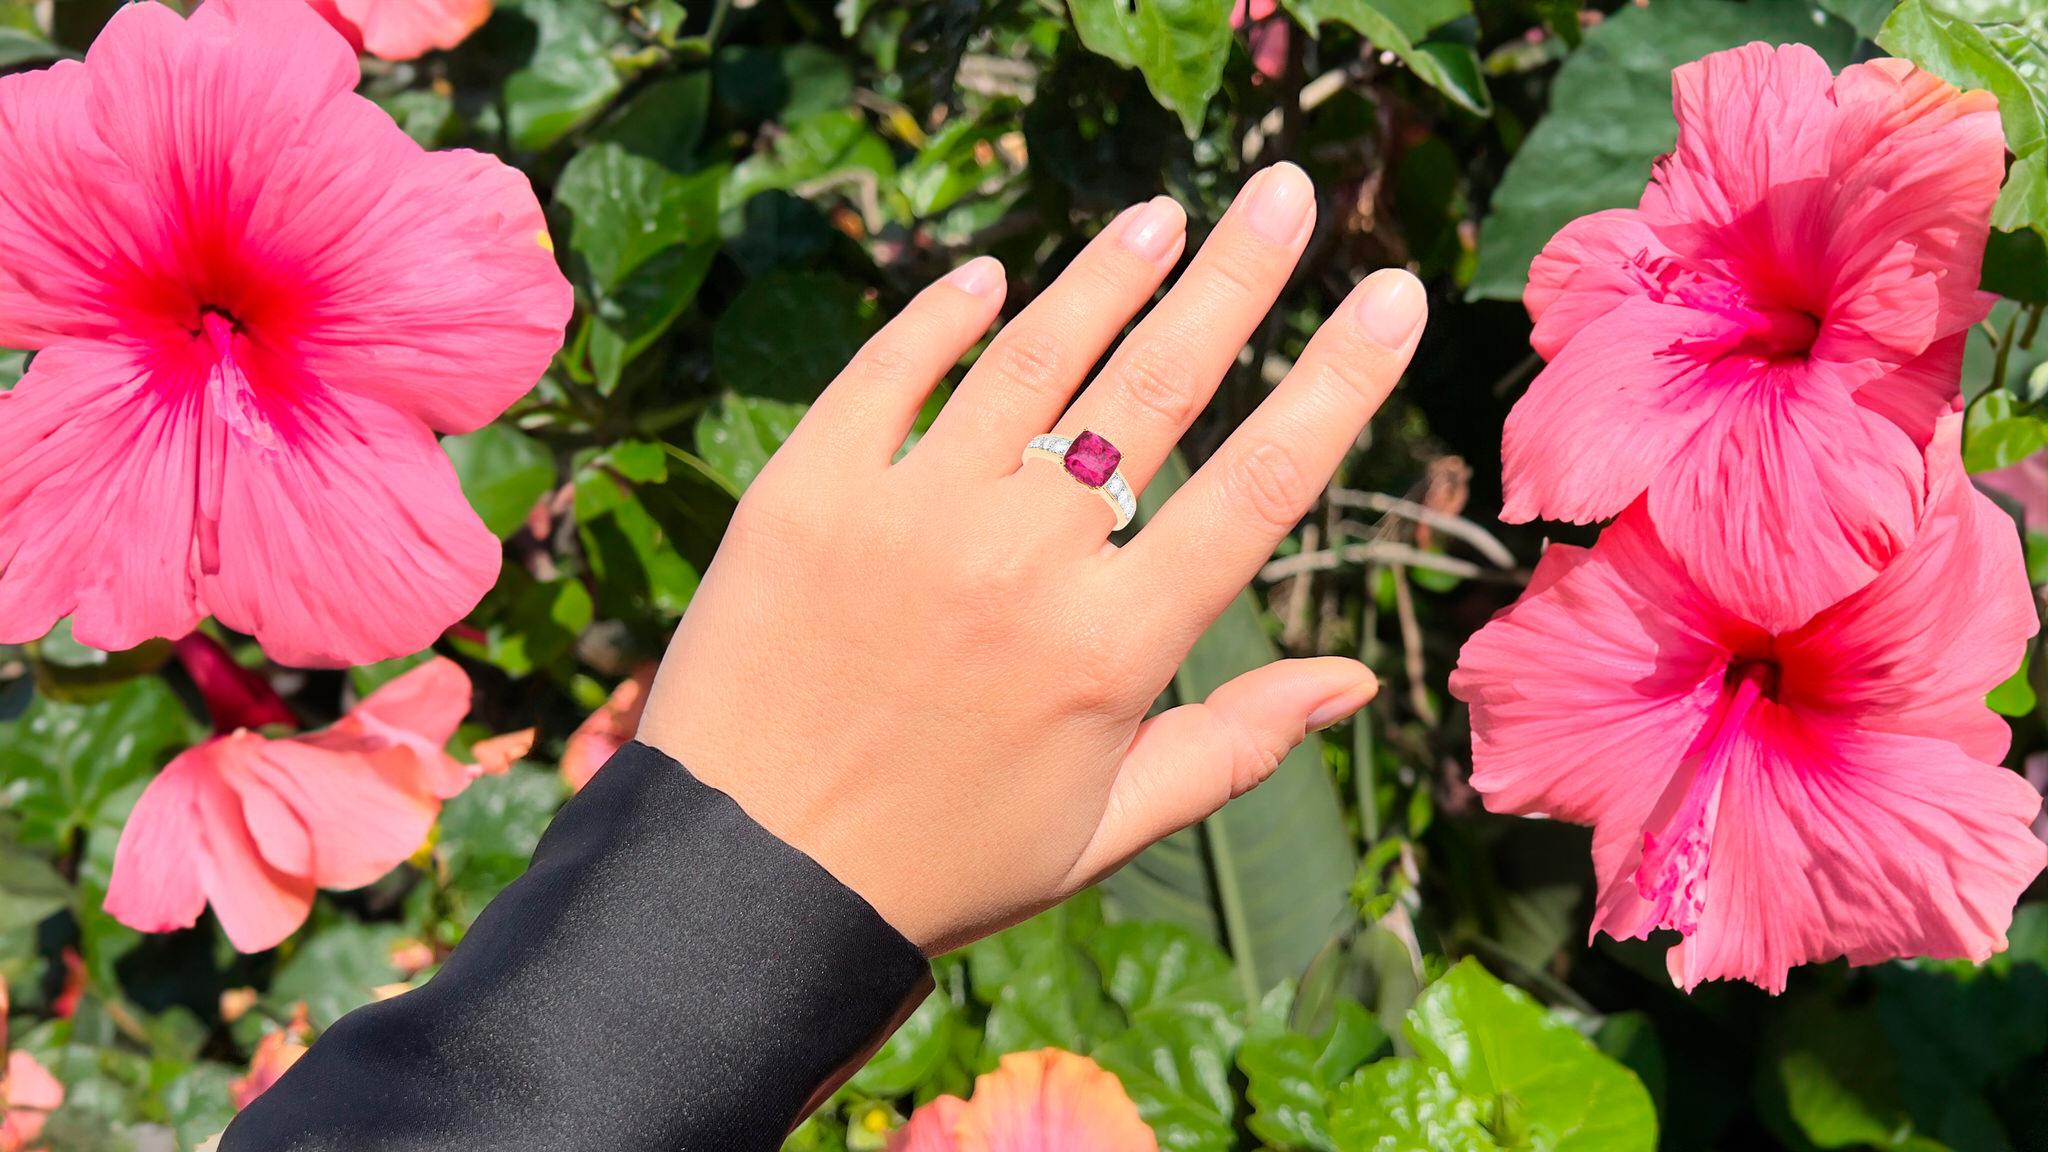 It comes with the Gemological Appraisal by GIA GG/AJP
All Gemstones are Natural
Rubellite = 2.26 Carats
8 Diamonds = 0.44 Carats
Metal: 14K  Yellow  Gold
Ring Size: 7* US
*It can be resized complimentary